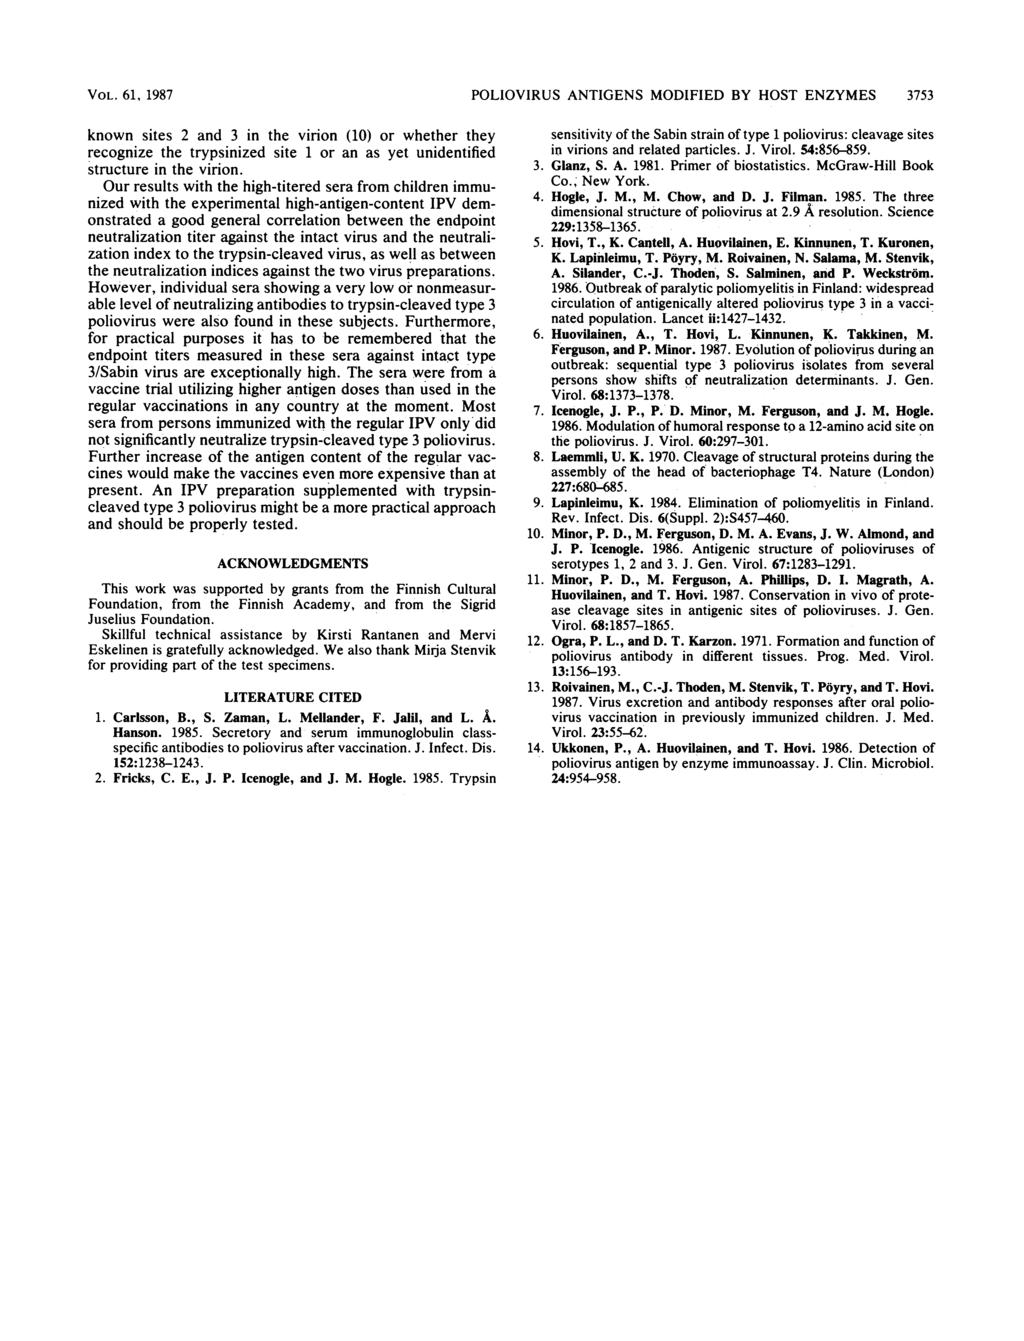 VOL. 61, 1987 POLIOVIRUS ANTIGENS MODIFIED BY HOST ENZYMES 3753 known sites 2 and 3 in the virion (1) or whether they recognize the trypsinized site 1 or an as yet unidentified structure in the